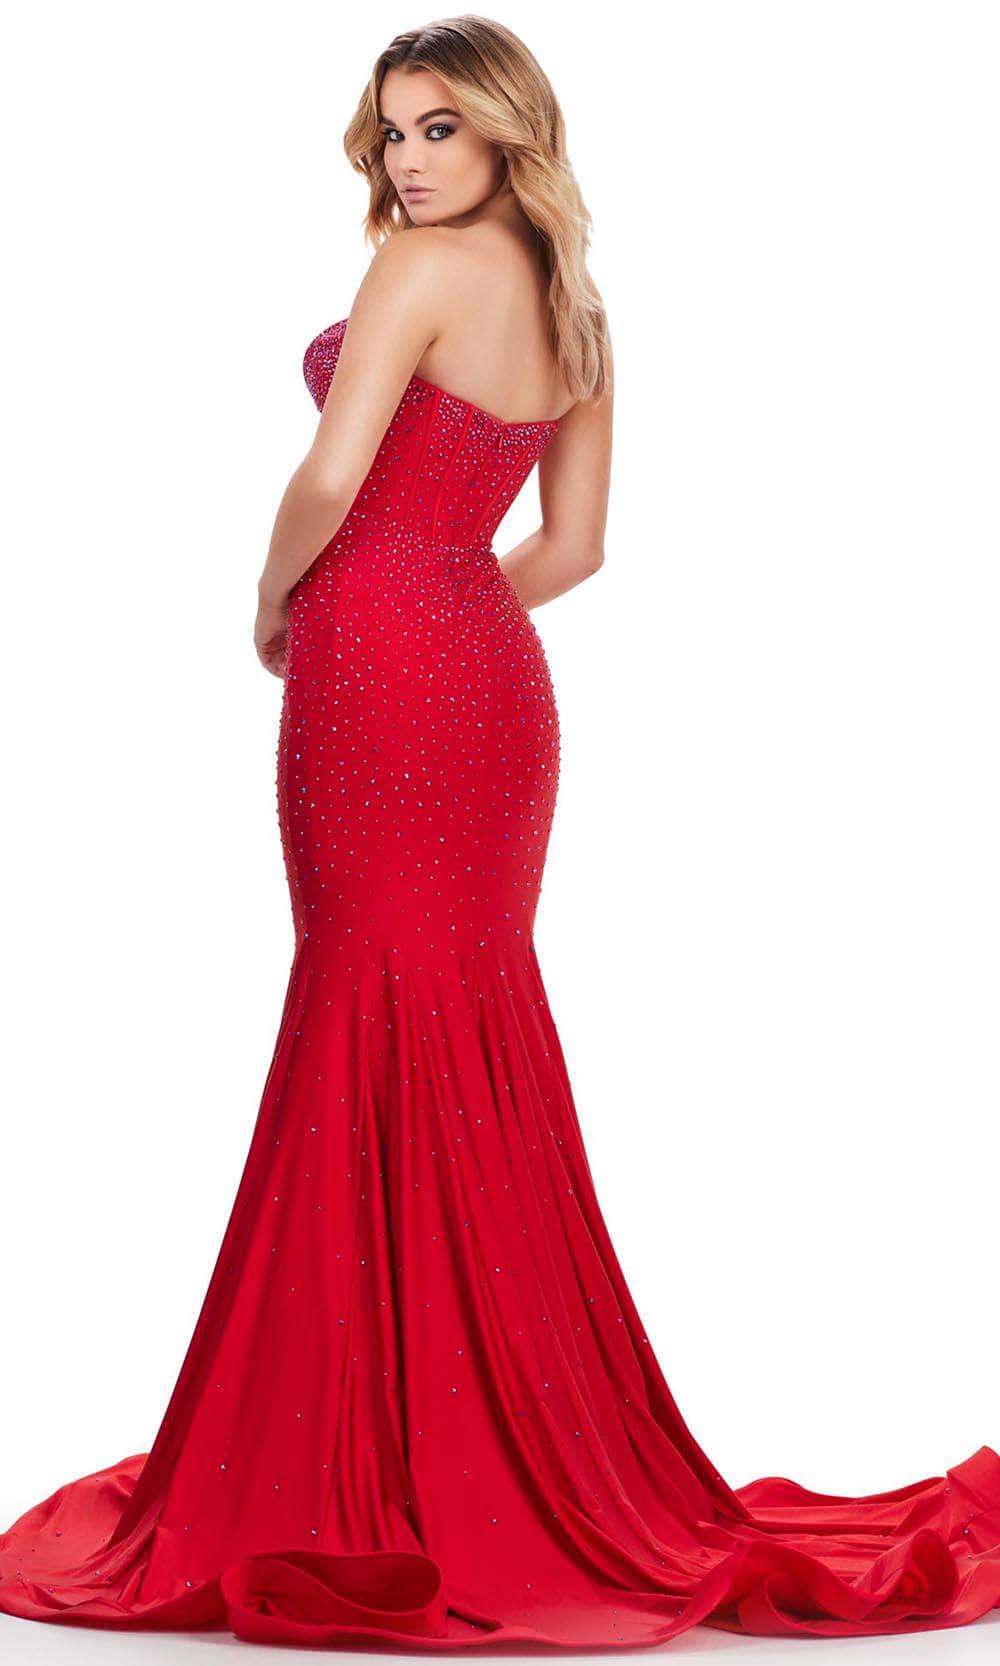 Ashley Lauren 11560 - Strapless Mermaid Evening Gown Special Occasion Dresses